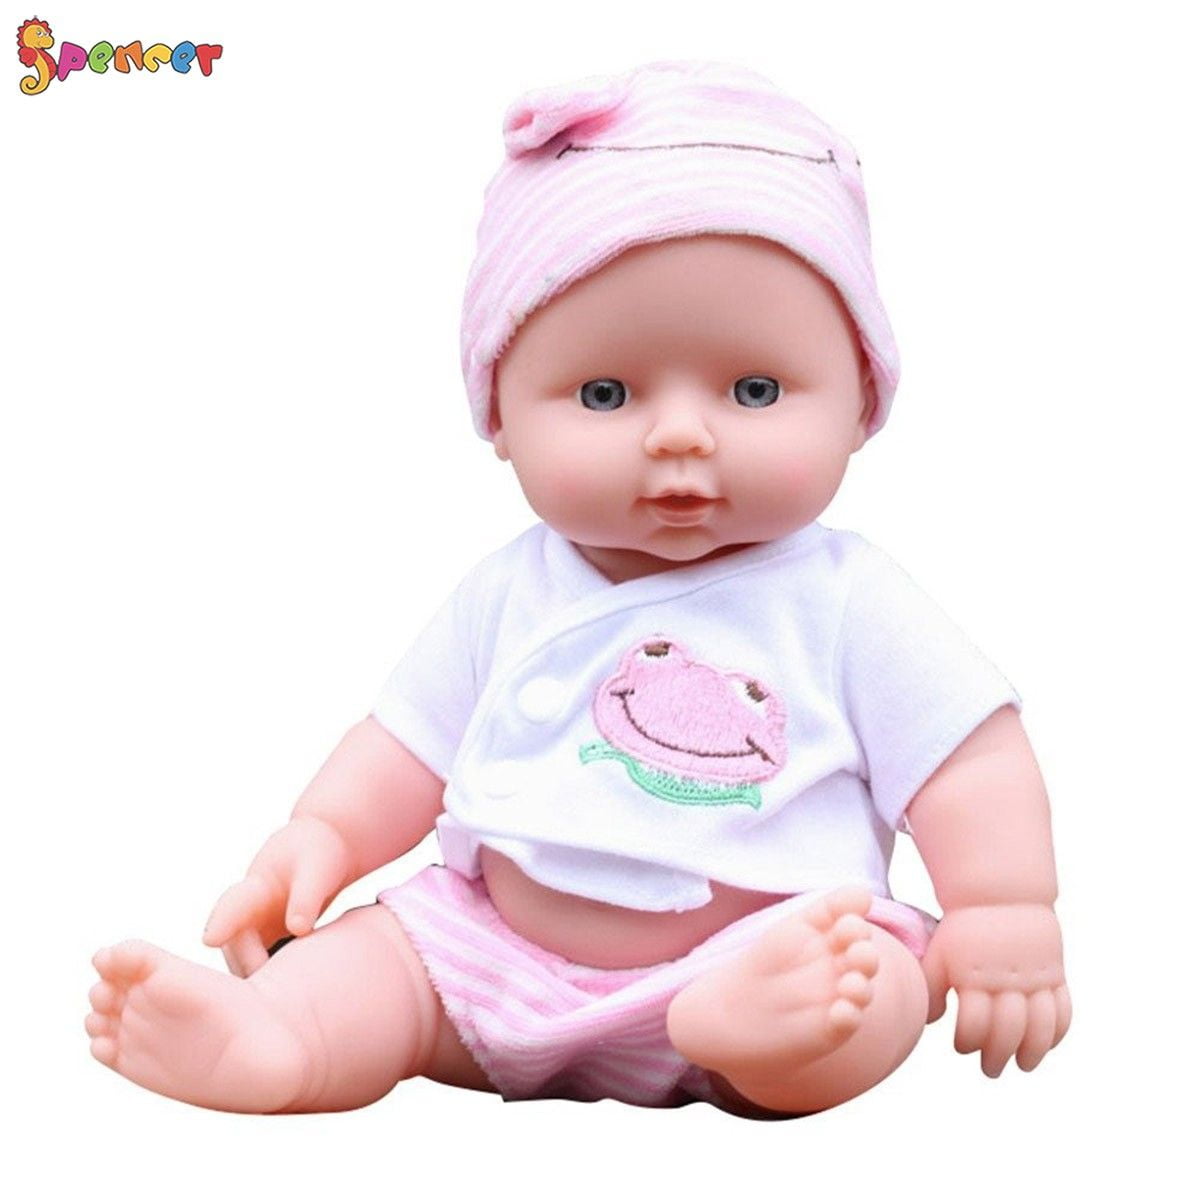 12" Lifelike Large Size Soft Bodied Baby Doll Girls Boys Dolly Toy With Sounds 